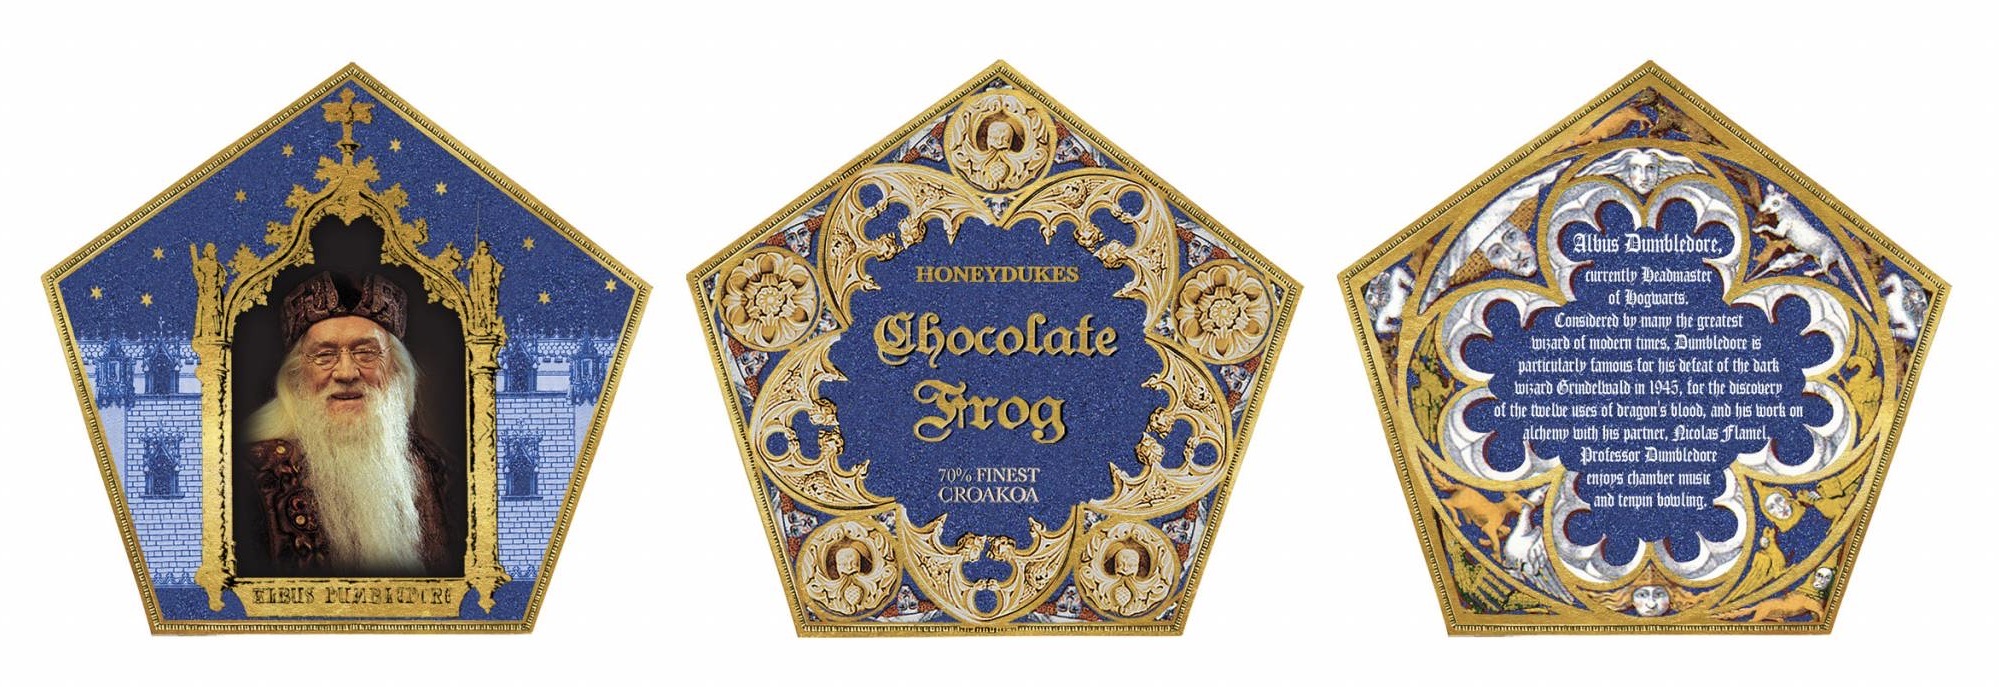 Harry Potter ☆☆☆GODRIC GRYFFINDOR☆☆☆ Chocolate Frog card 100% AUTHENTIC 